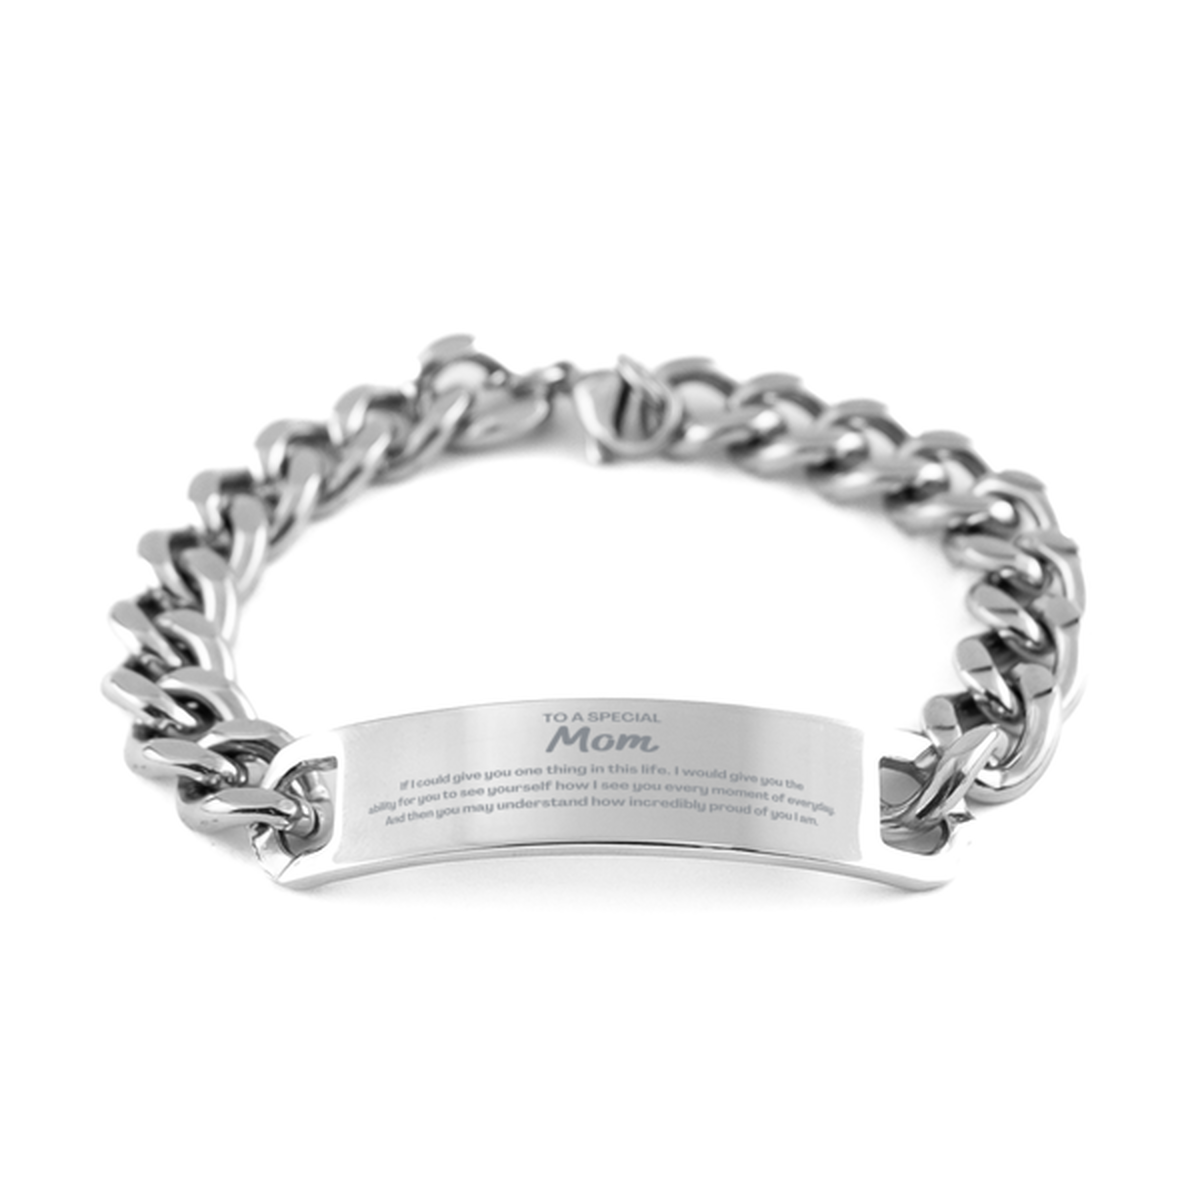 To My Mom Cuban Chain Stainless Steel Bracelet, Gifts For Mom Engraved, Inspirational Gifts for Christmas Birthday, Epic Gifts for Mom To A Special Mom how incredibly proud of you I am